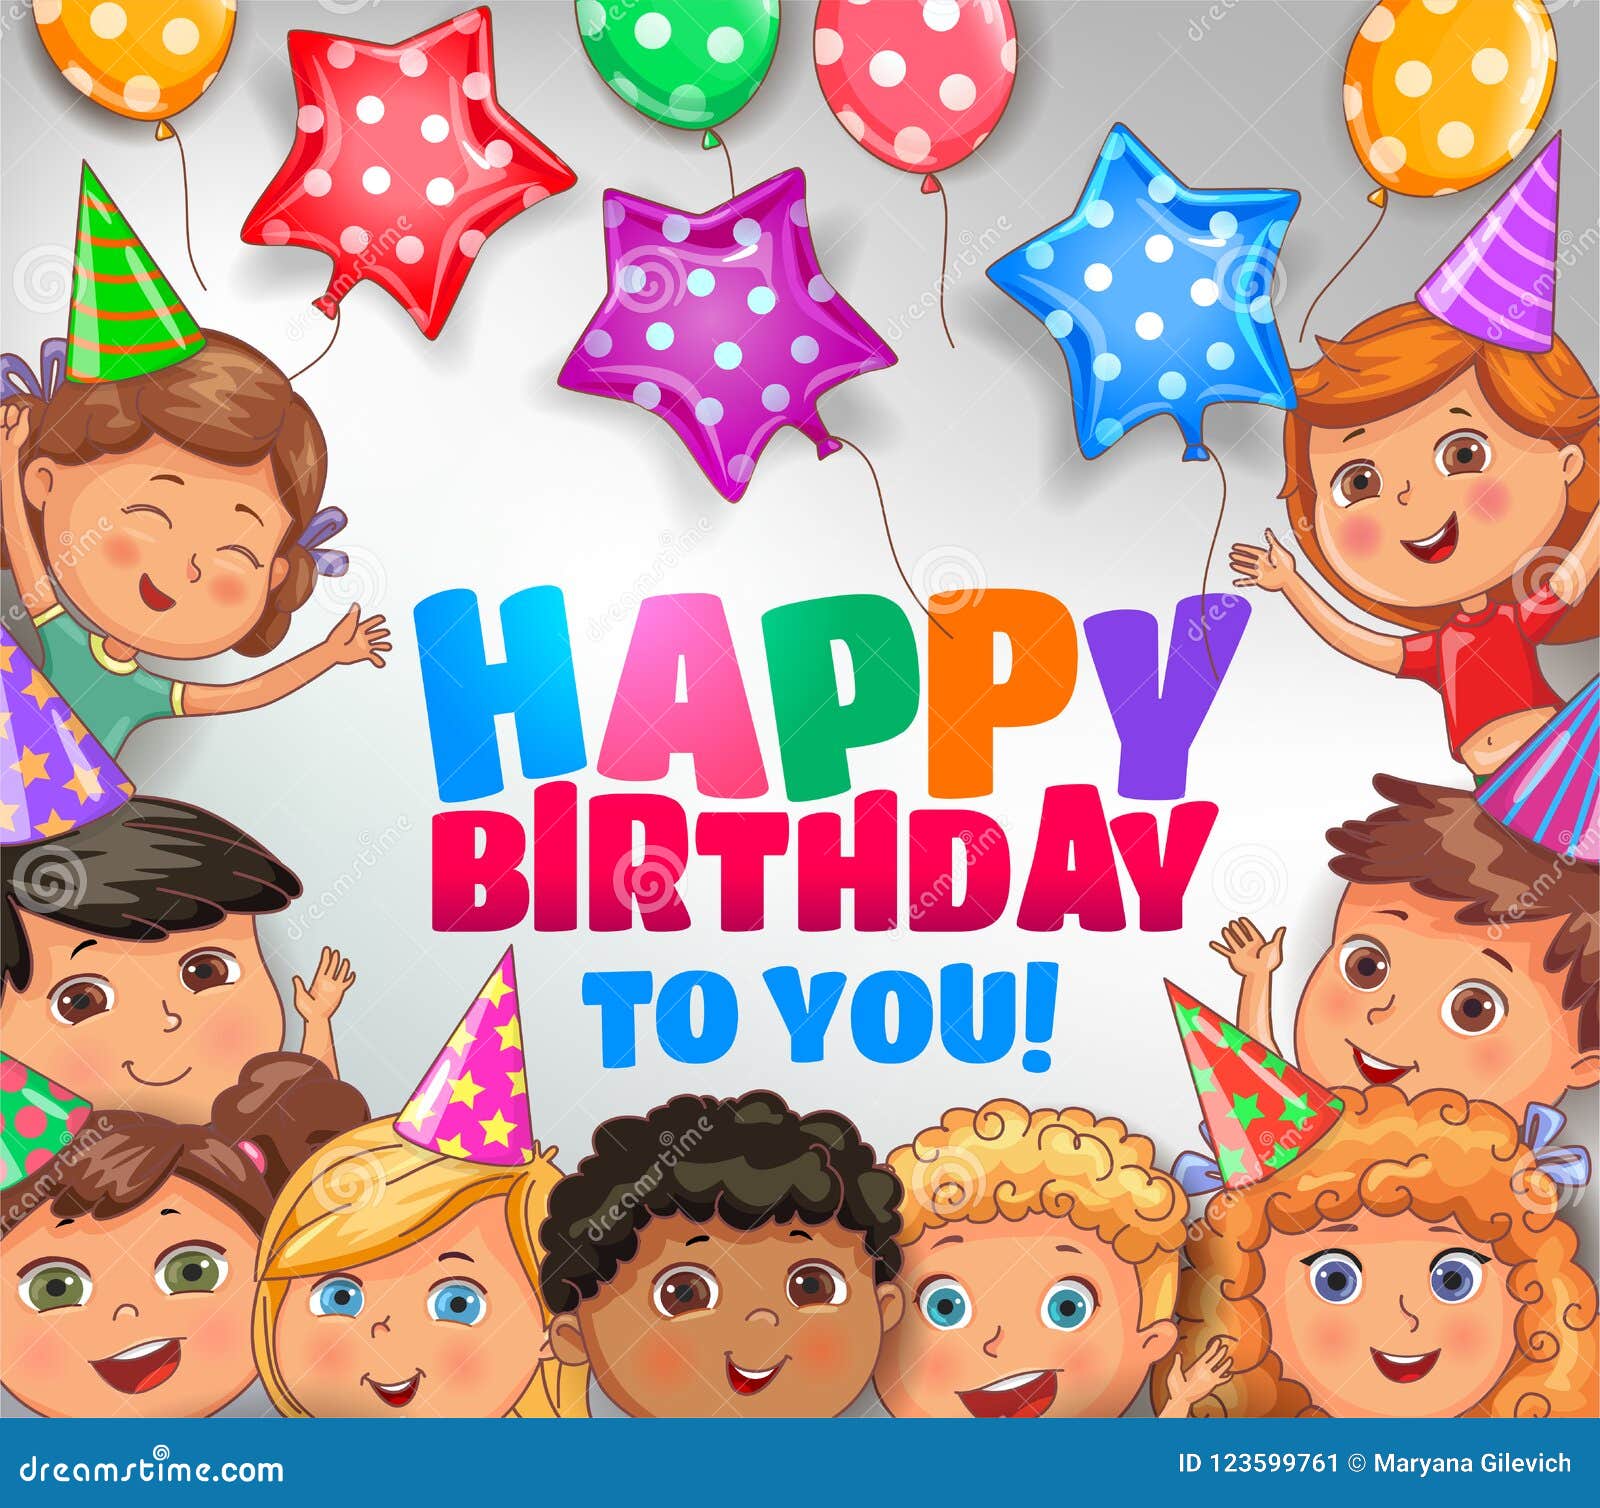 Happy Birthday To You Bright Design with Cute Children Stock ...